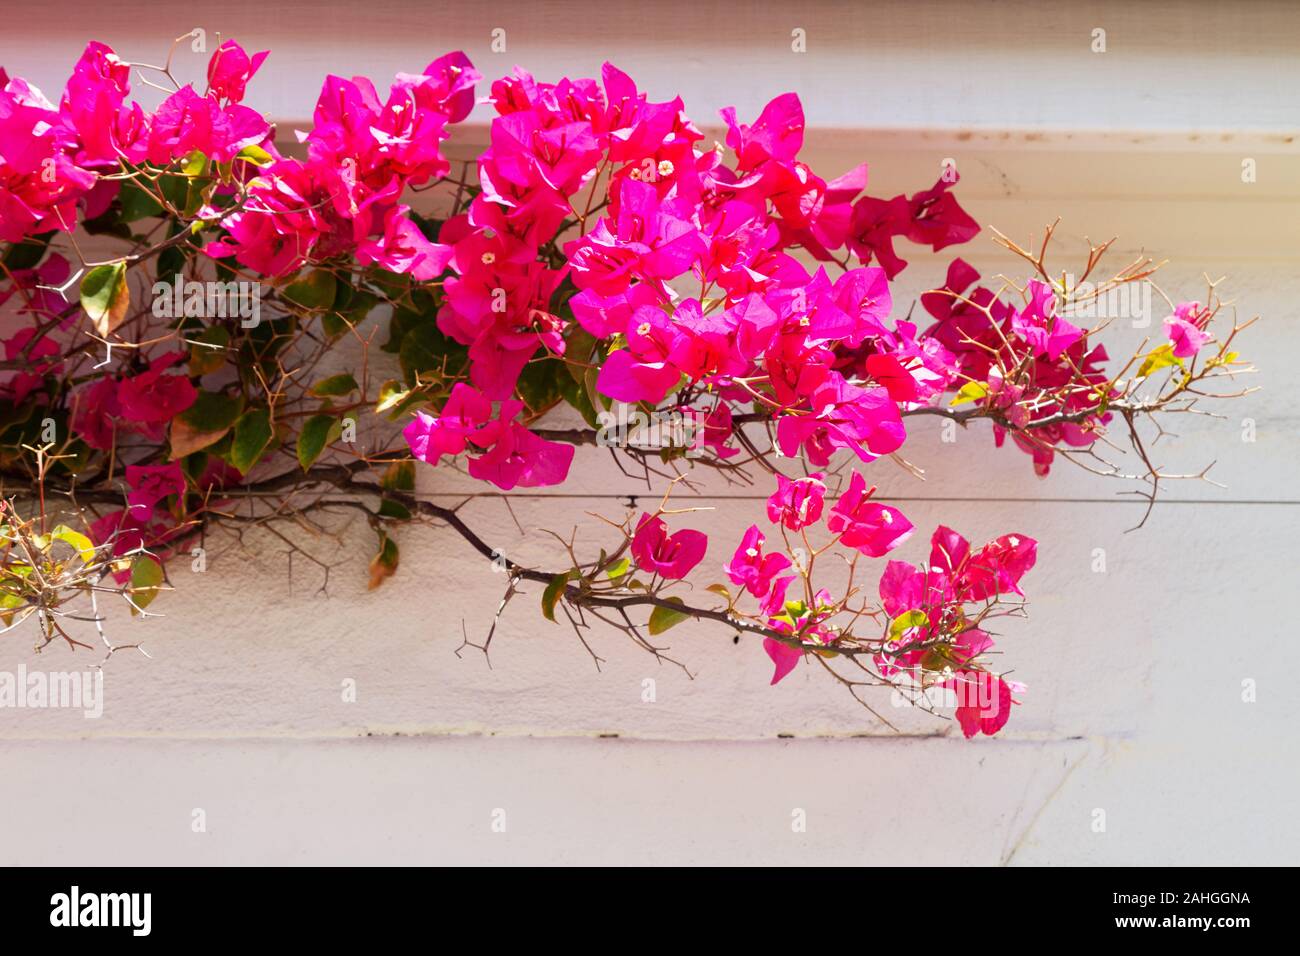 Deep pink or Red Bougainvillea flowers growing against white wood, Australia Stock Photo